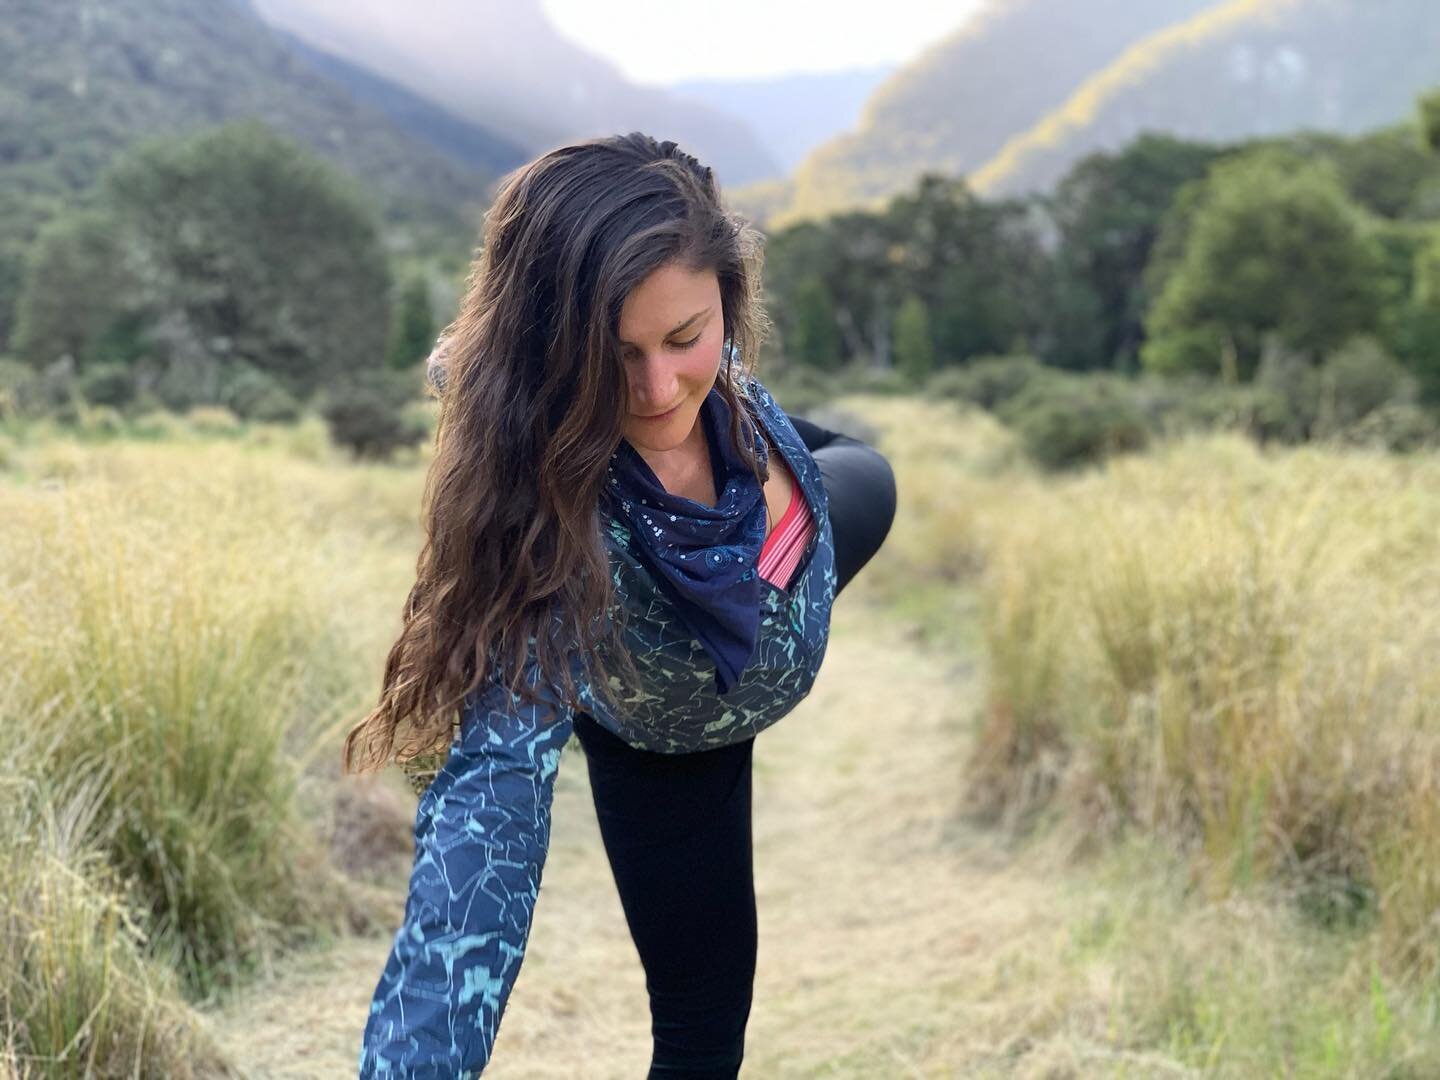 Summer days are precious. Get outside for morning Yoga this Friday @dharmasgarden with @sydleto 

Friday 7:30-8:30a ~ Yoga in the Stone Circle

Sliding scale $12-24

Join us throughout the month with various teachers leading.

8/11 - Sydney Leto
8/18